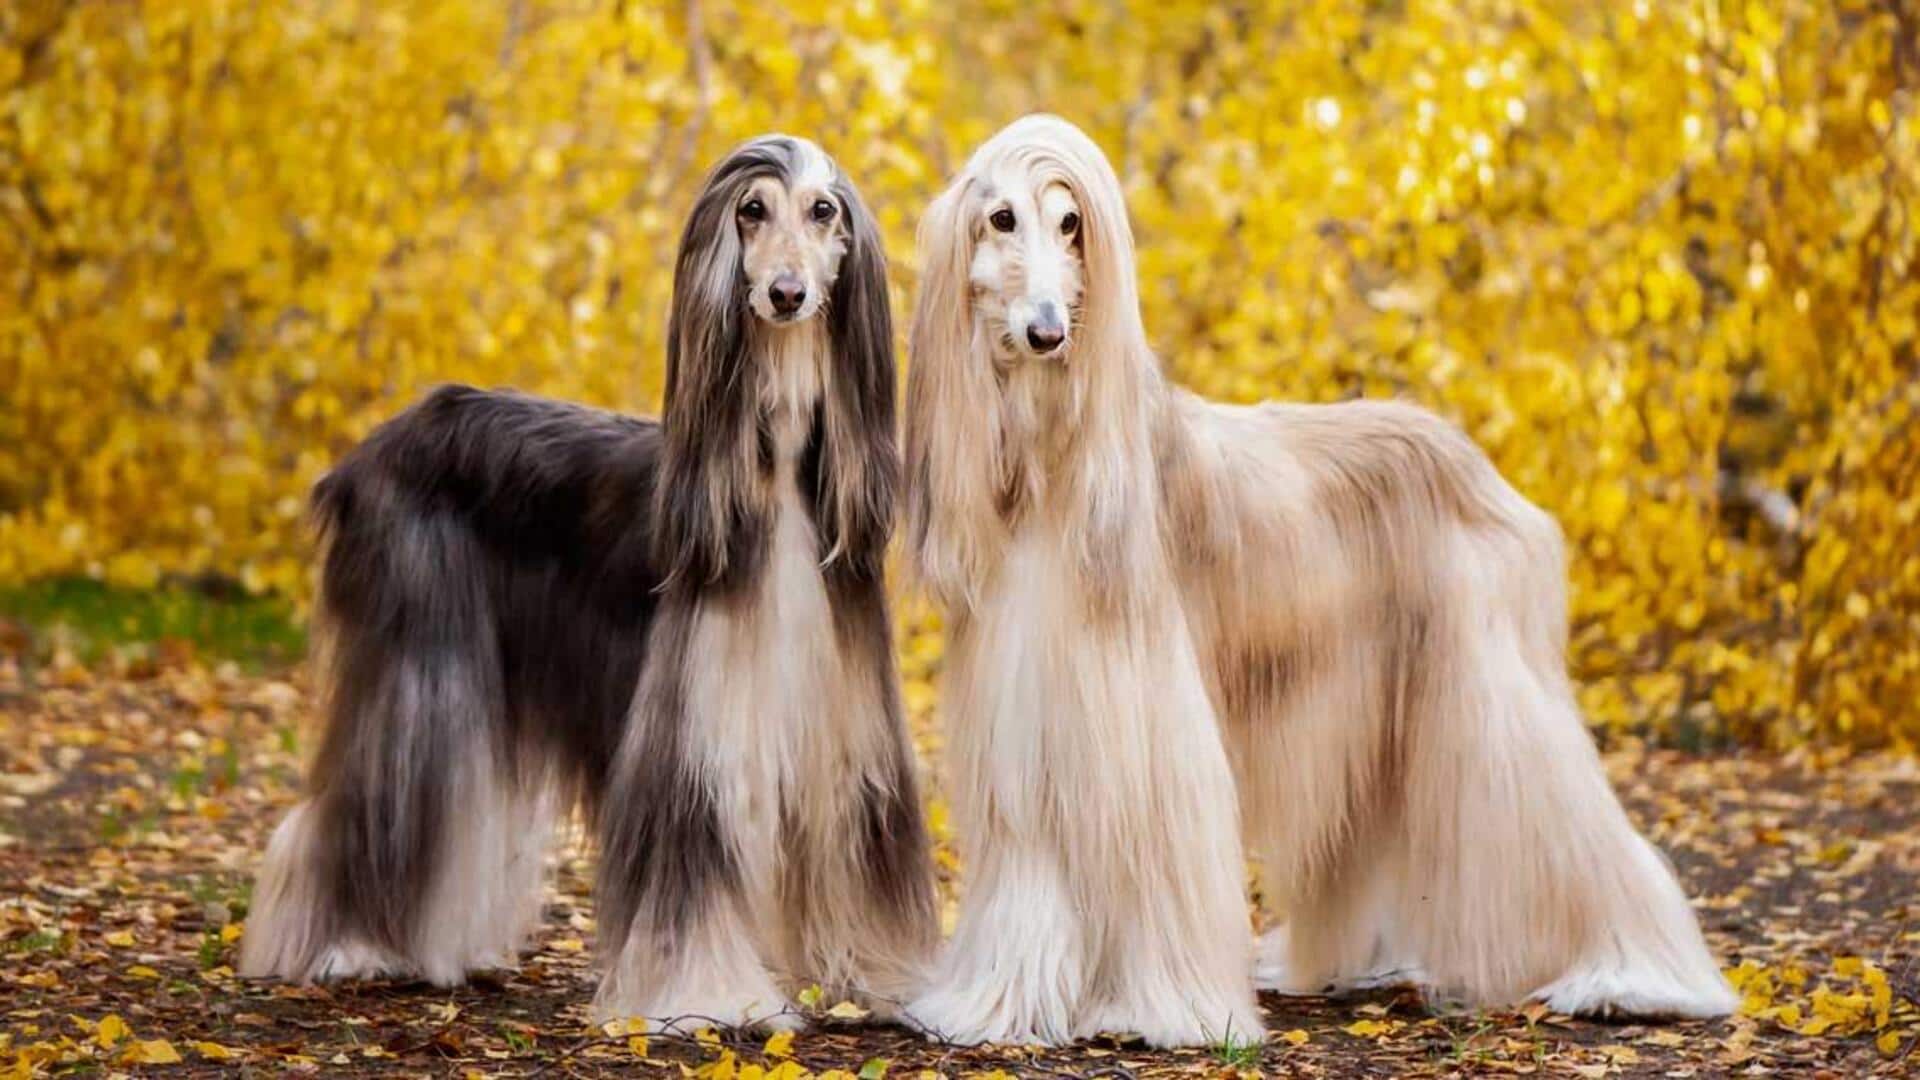 Afghan Hound dog grooming: Take note of these tips